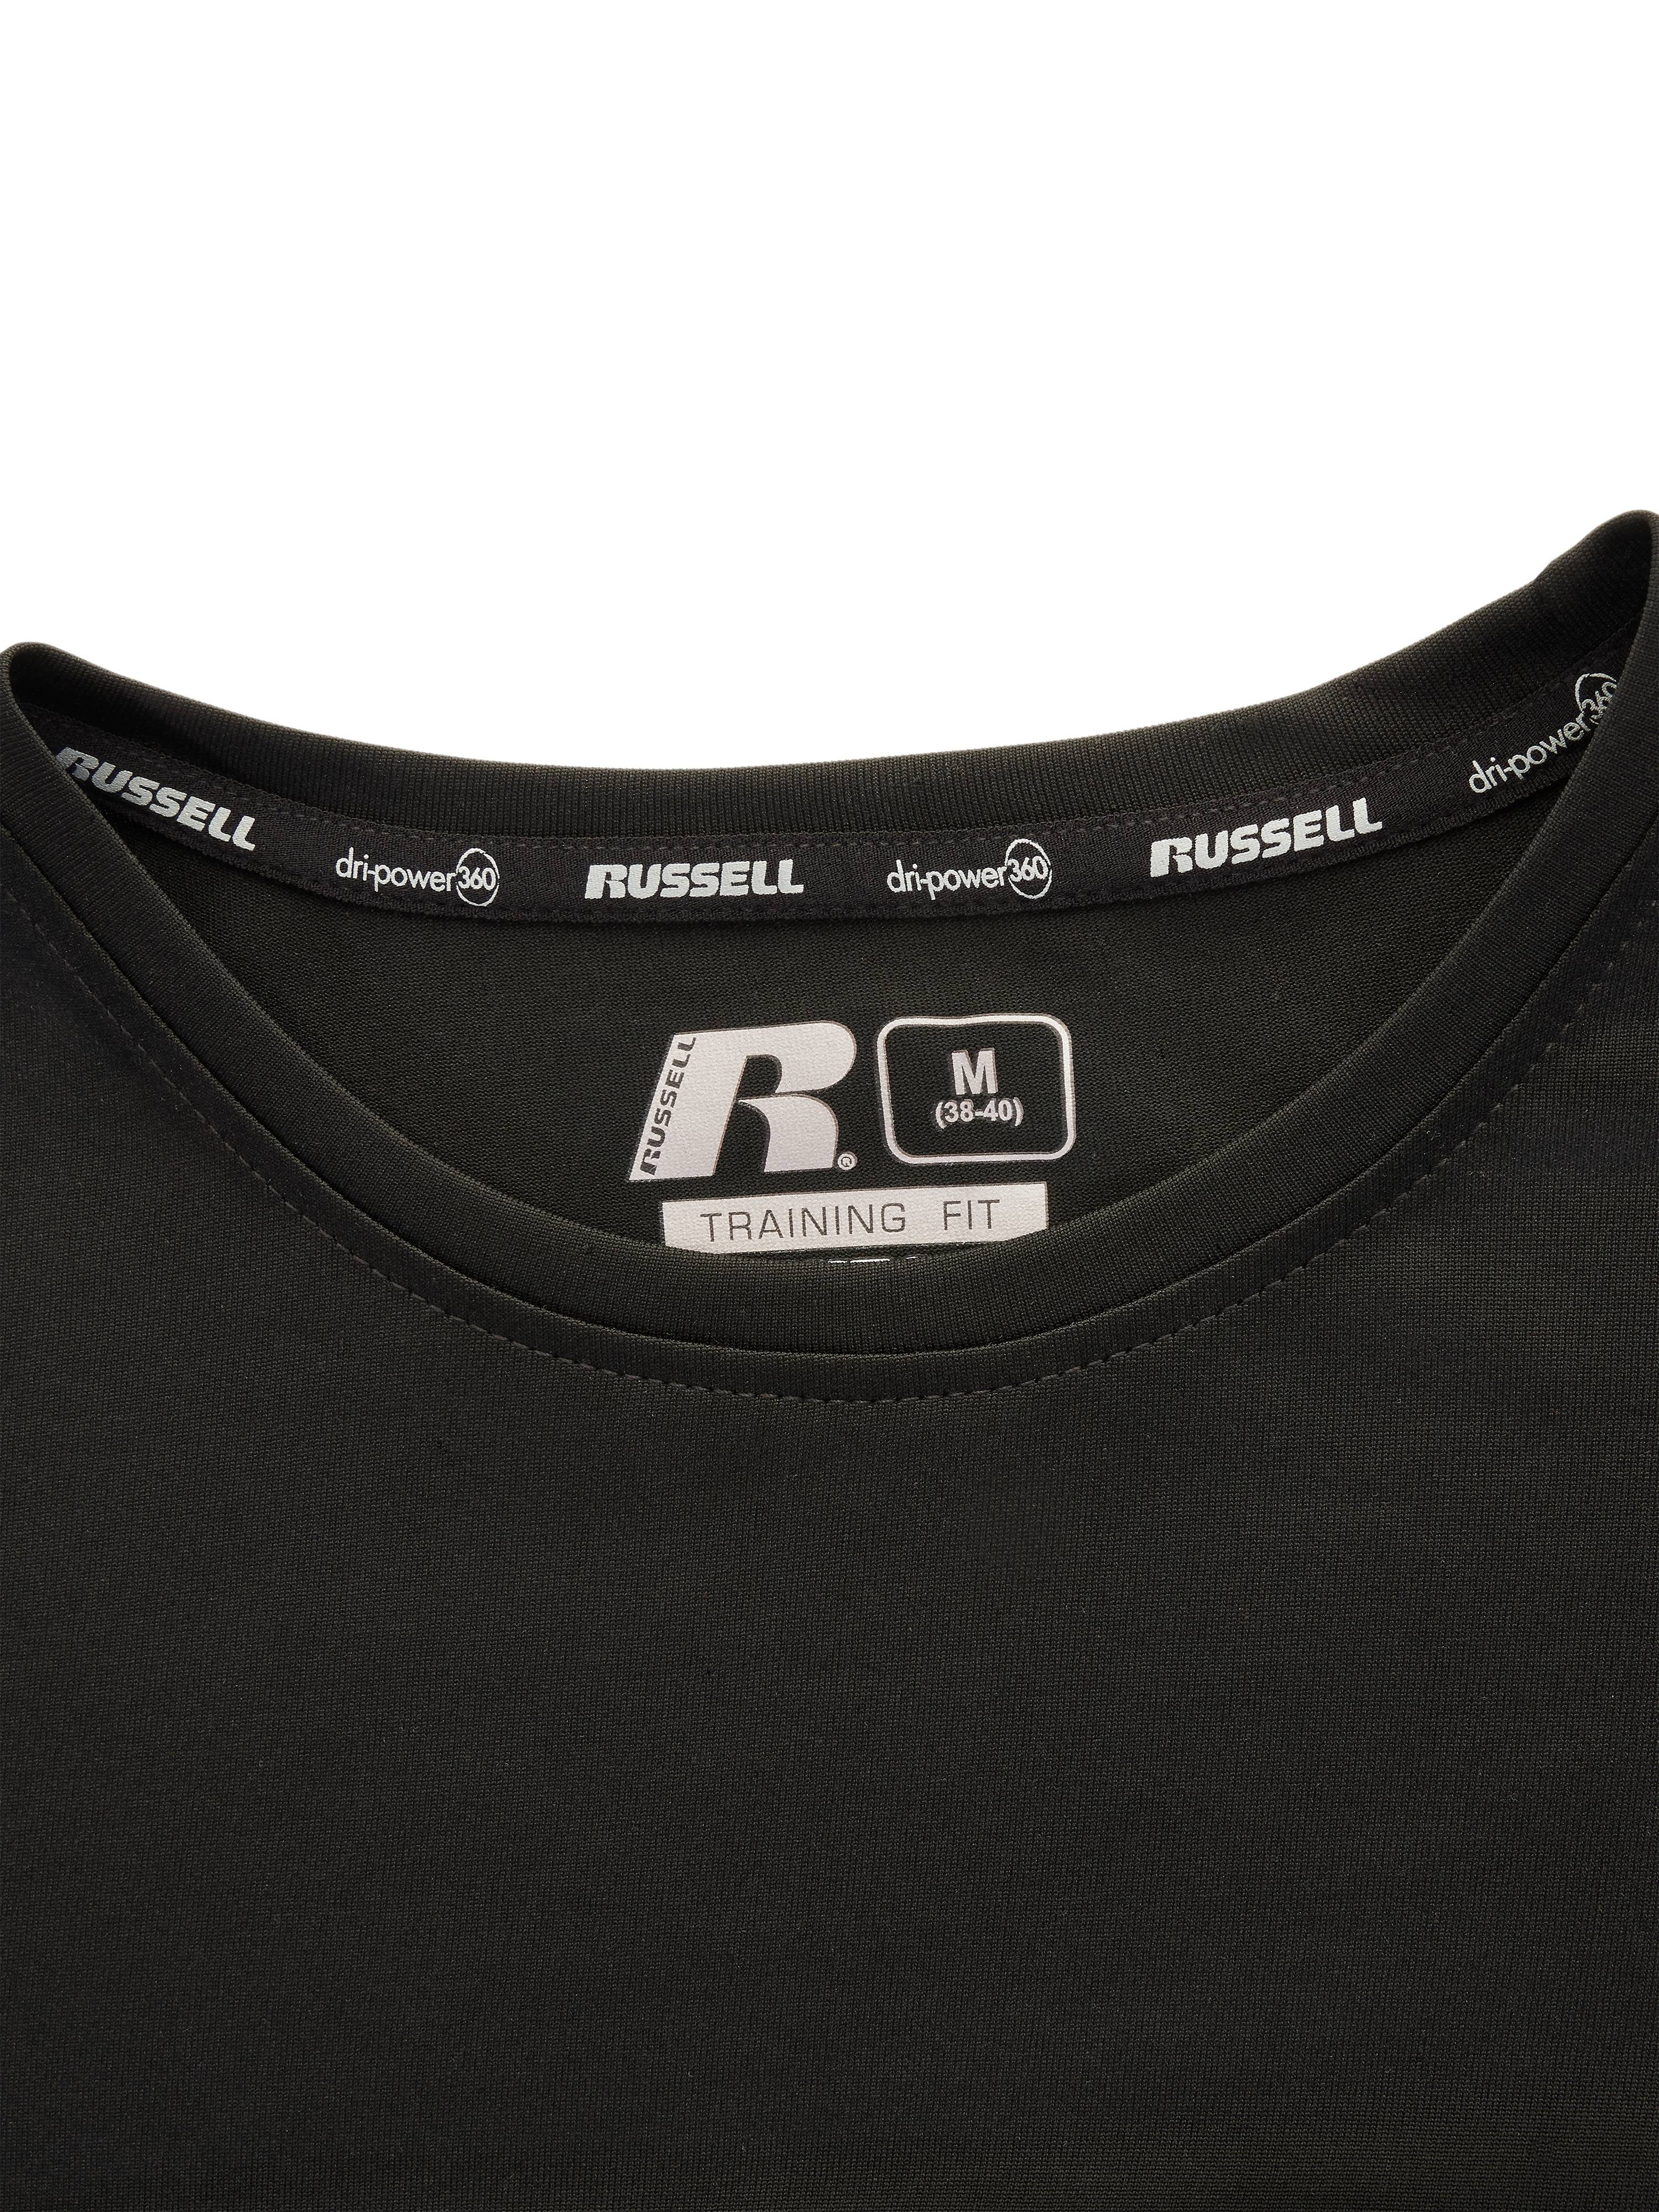 russell dri power 360 training fit fresh force